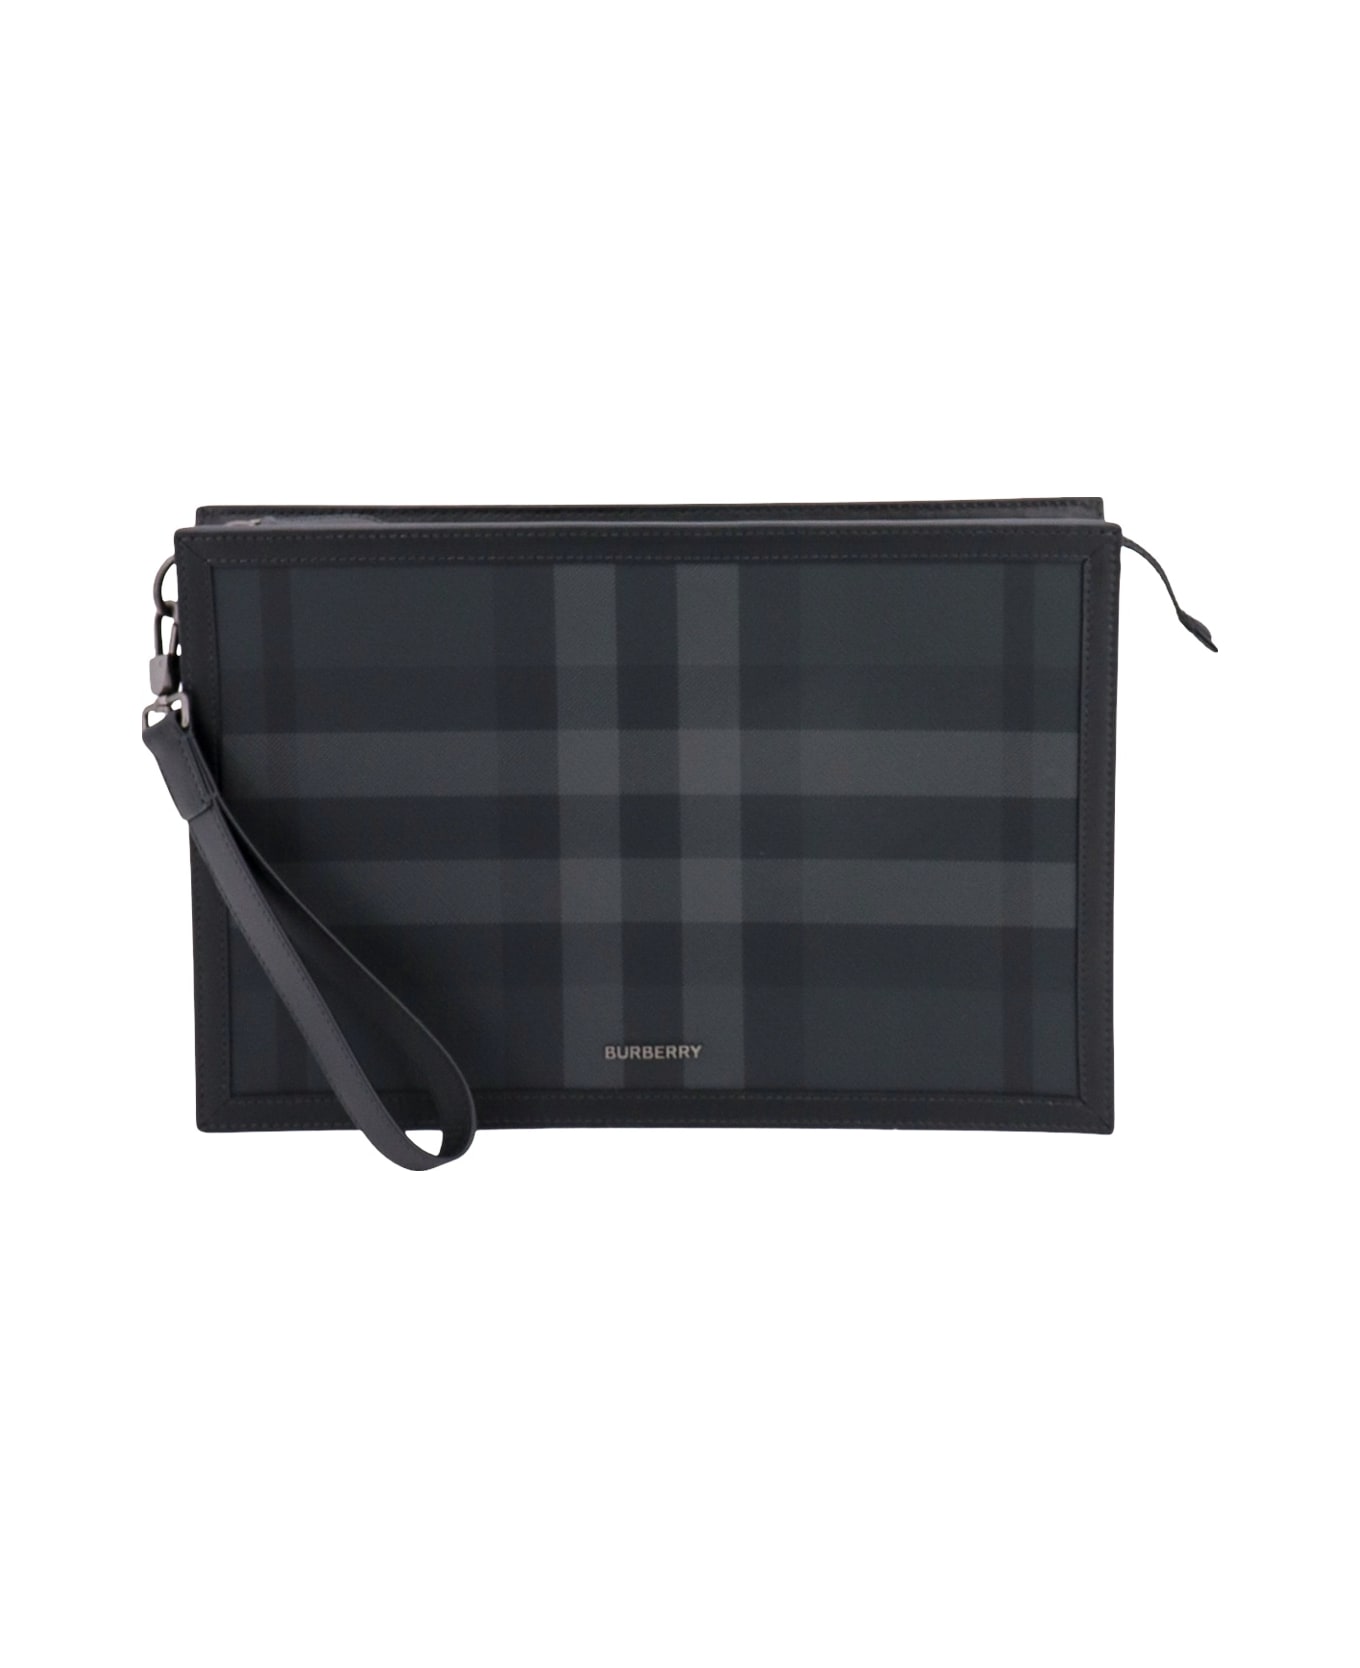 Burberry Frame Pouch - Black クラッチバッグ